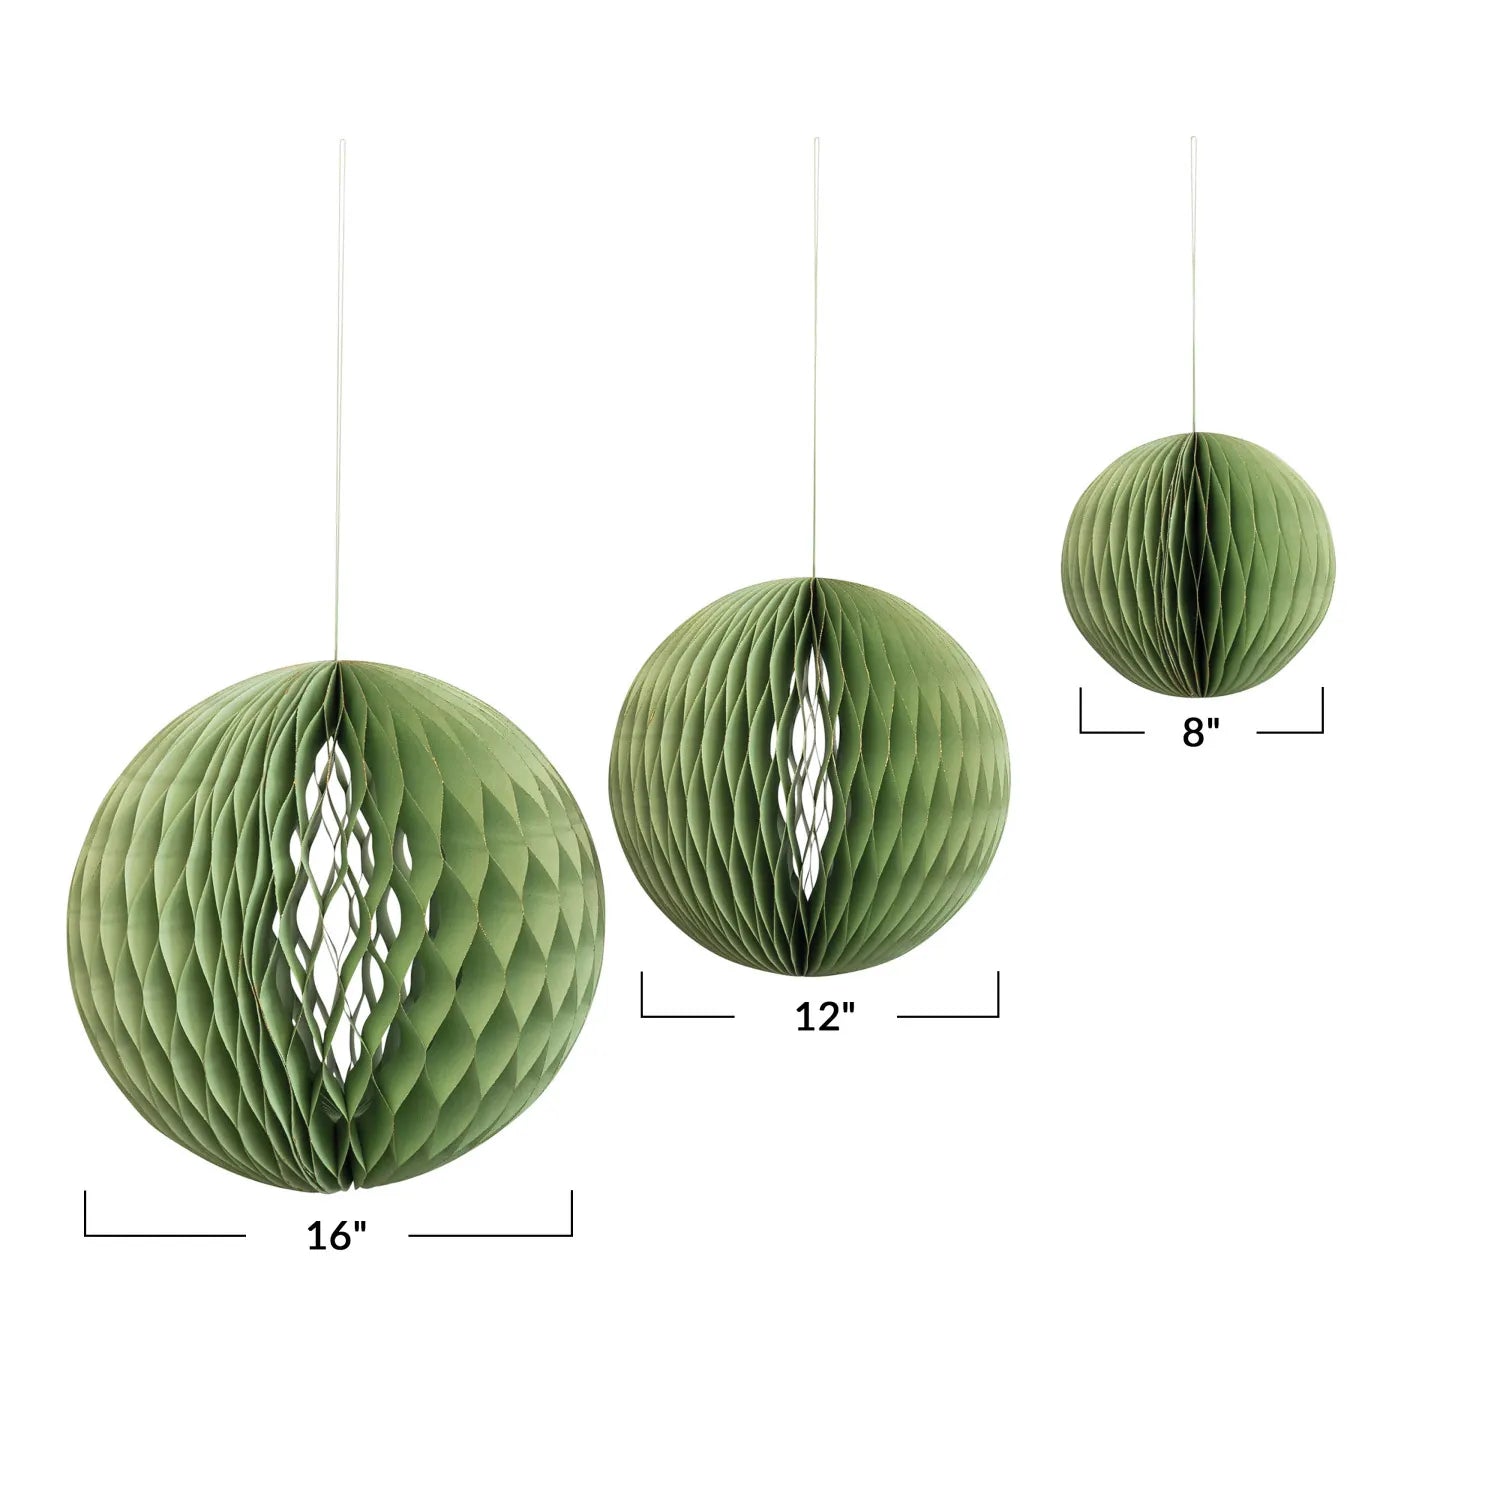 Green paper ornament balls shown in 3 different sizes. 